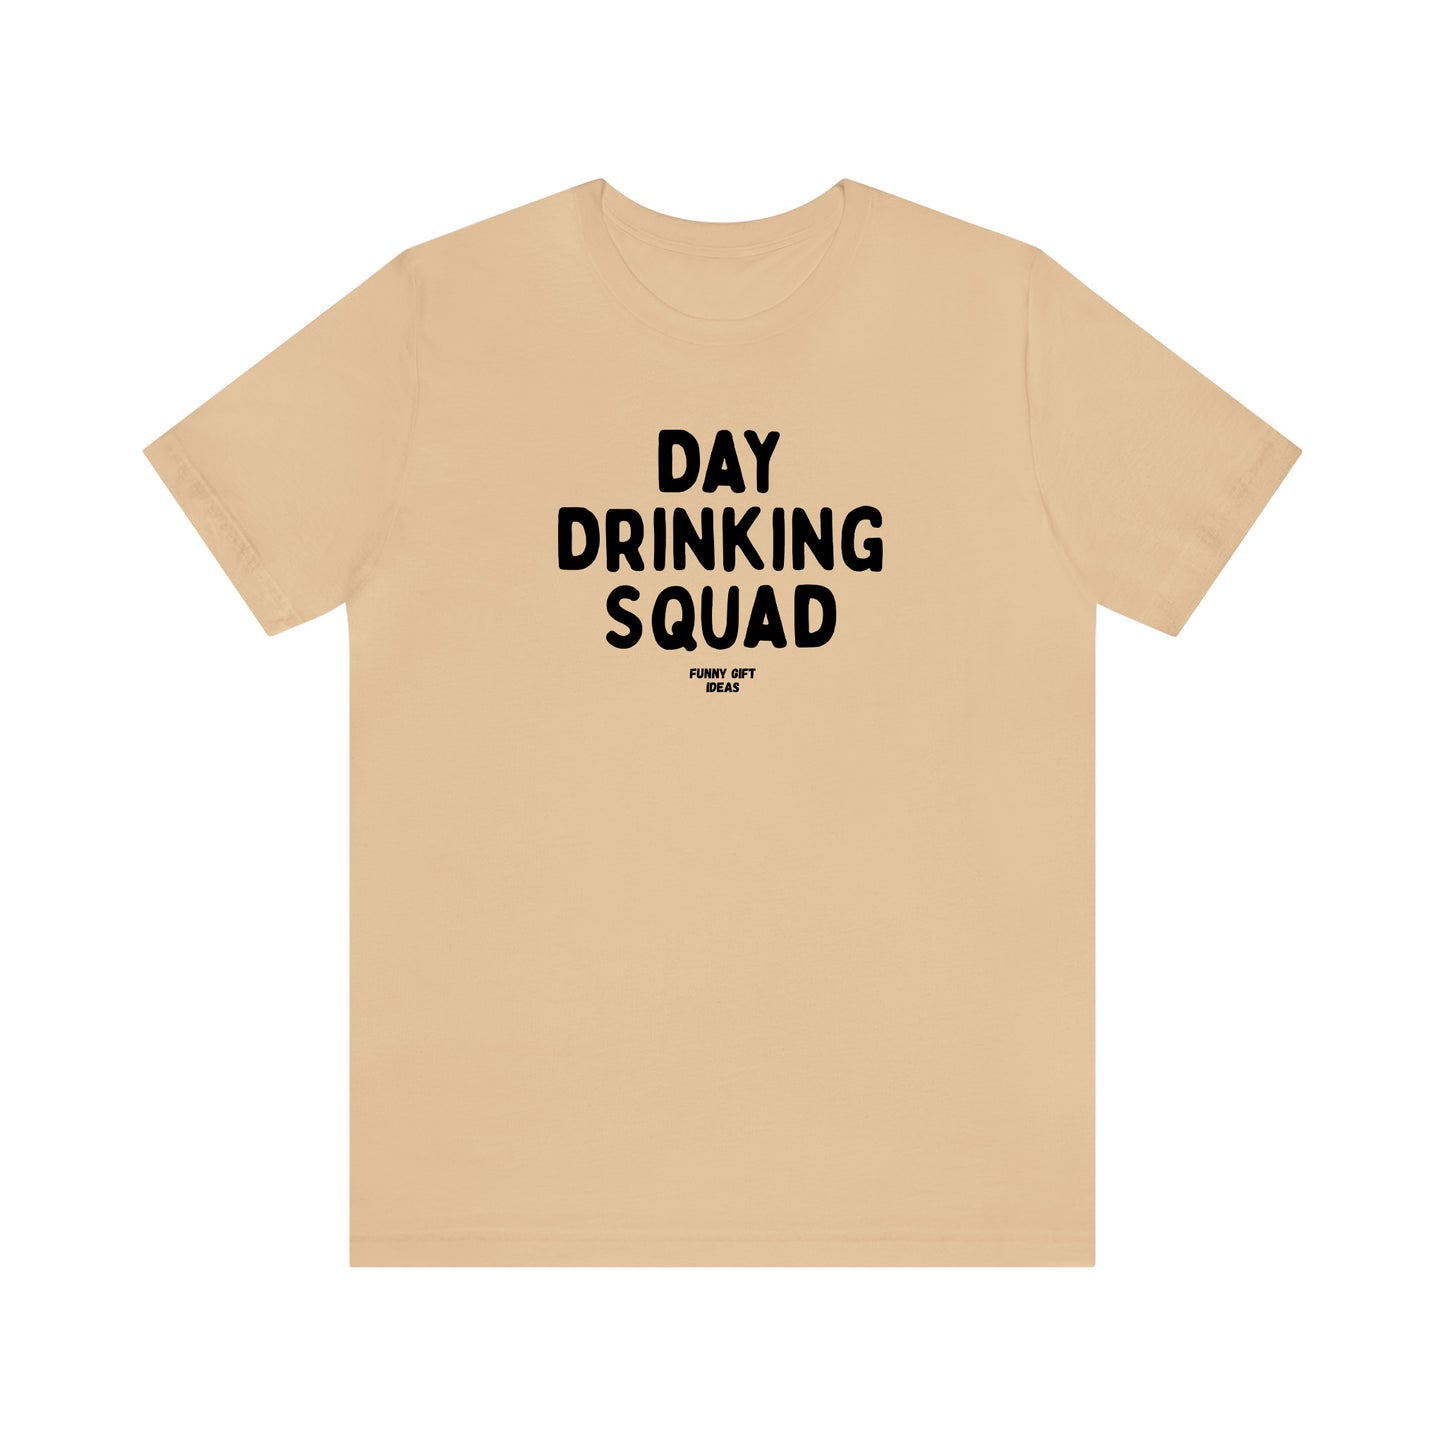 Funny Shirts for Women - Day Drinking Squad - Women's T Shirts